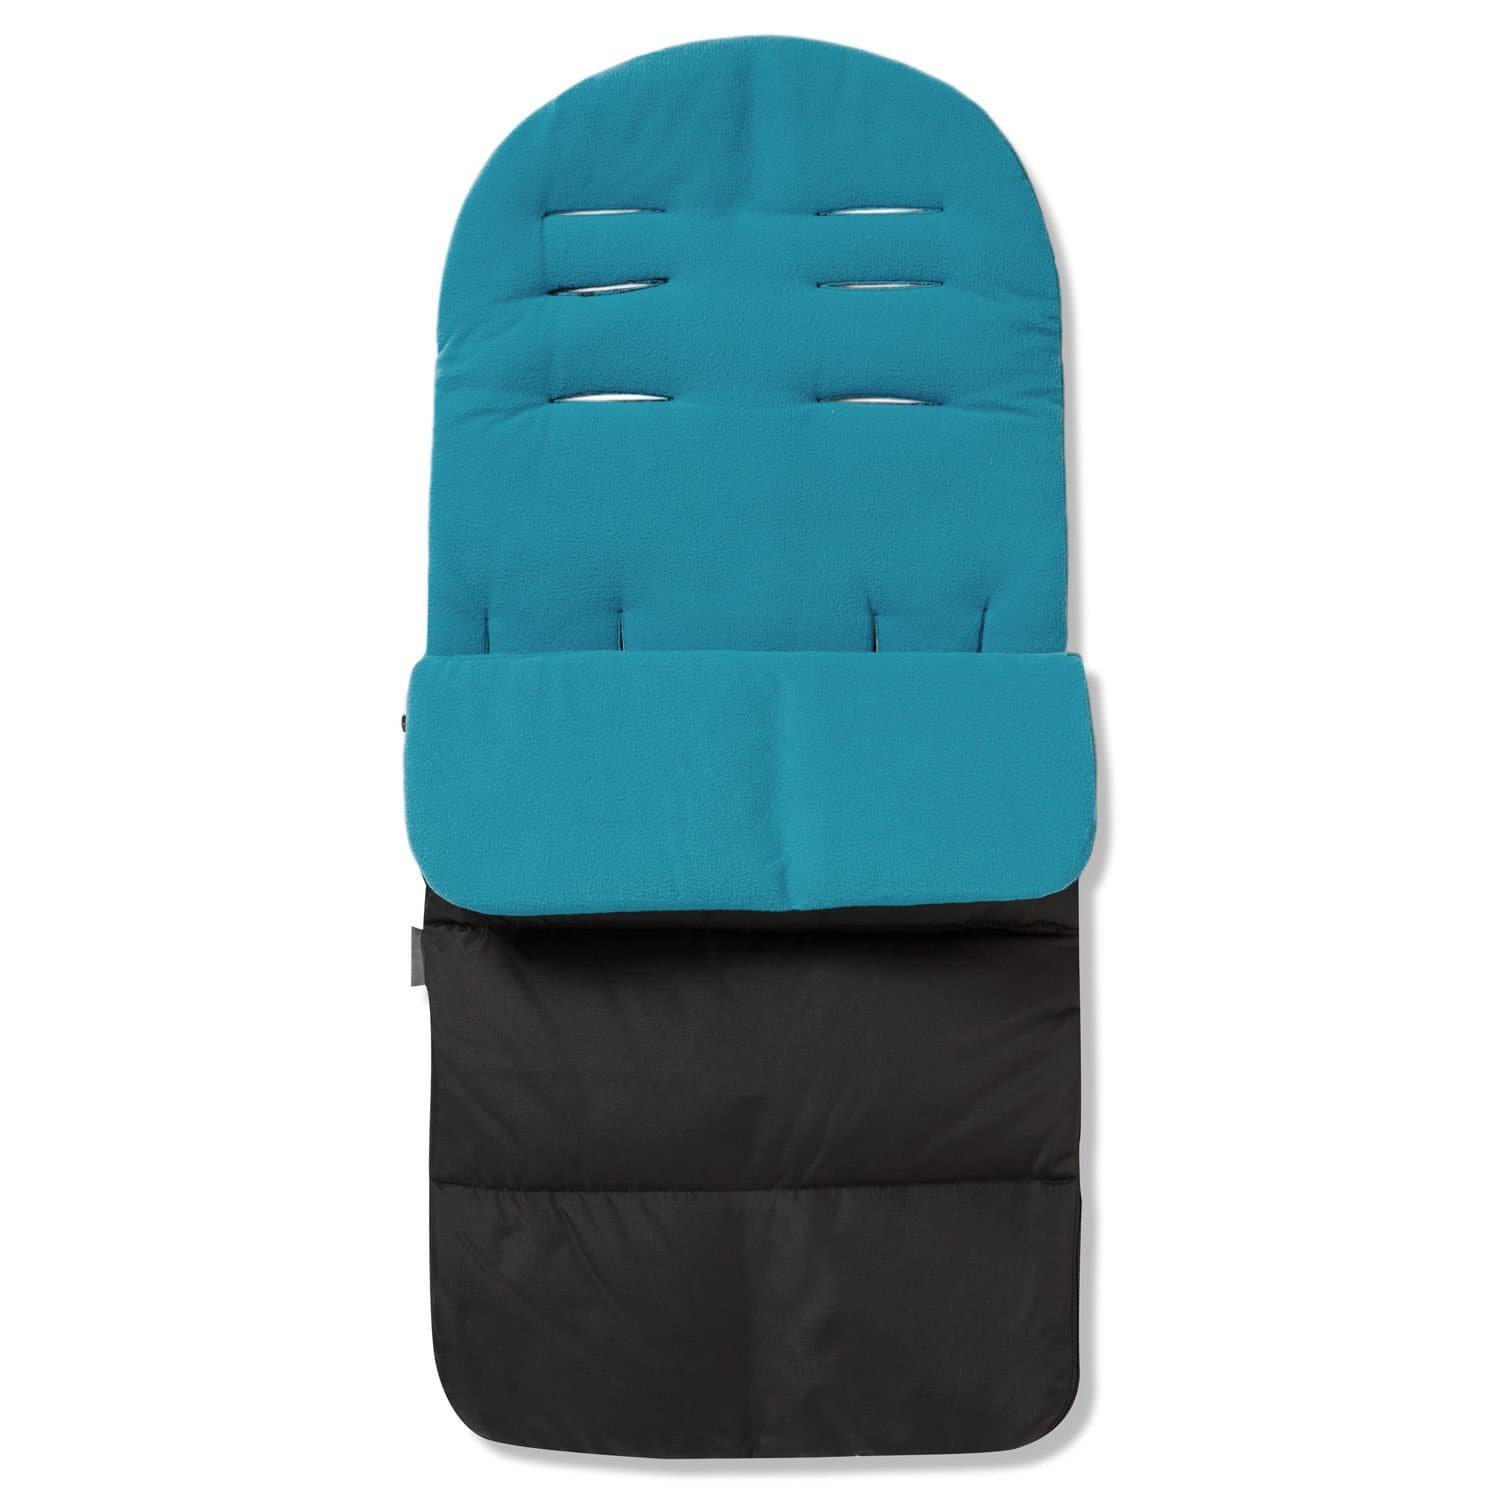 Premium Footmuff / Cosy Toes Compatible with Recaro - For Your Little One